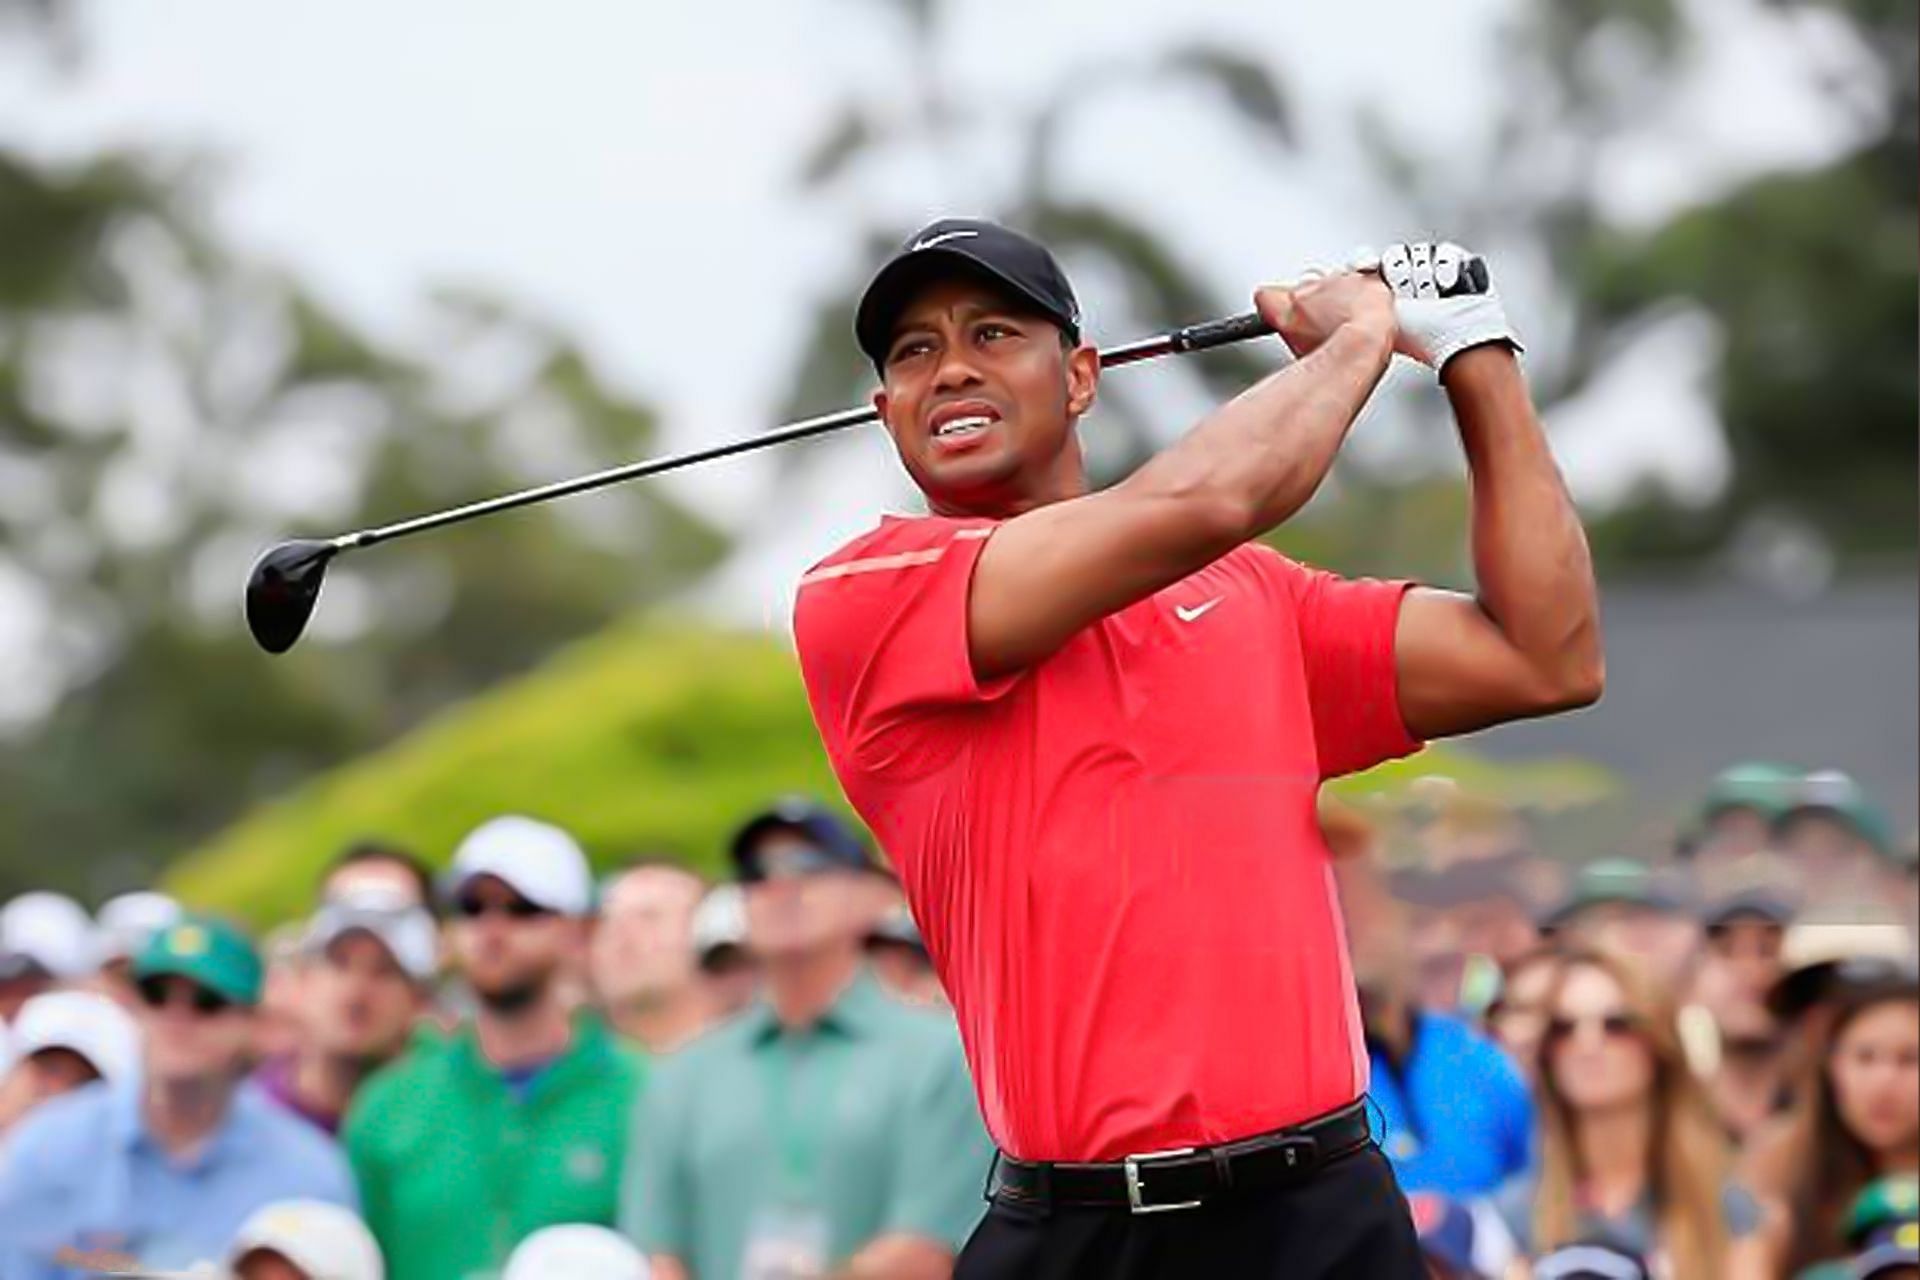 Tiger Woods is considered as a legendary golfer by many (Image via Getty Images)